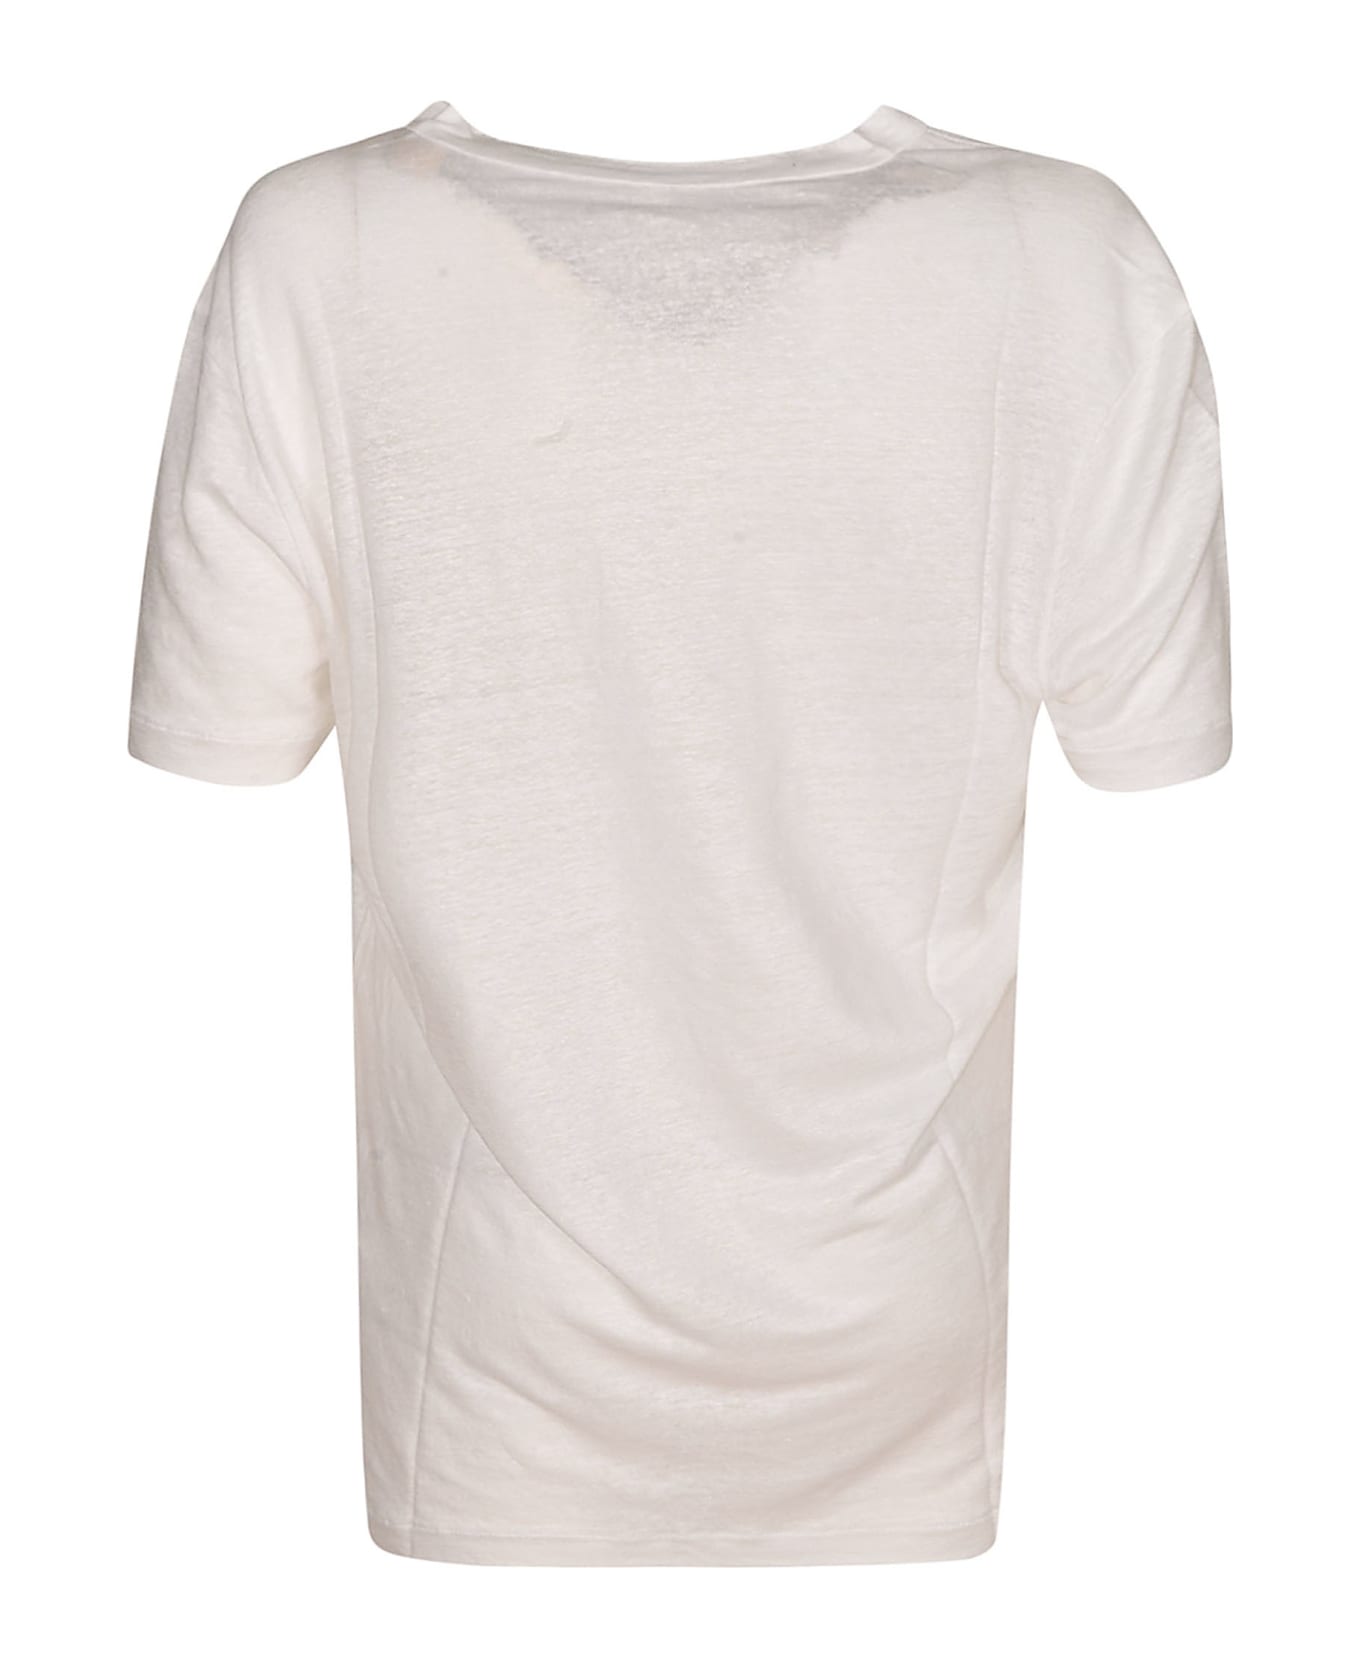 Majestic Filatures Fitted Classic T-shirt - White